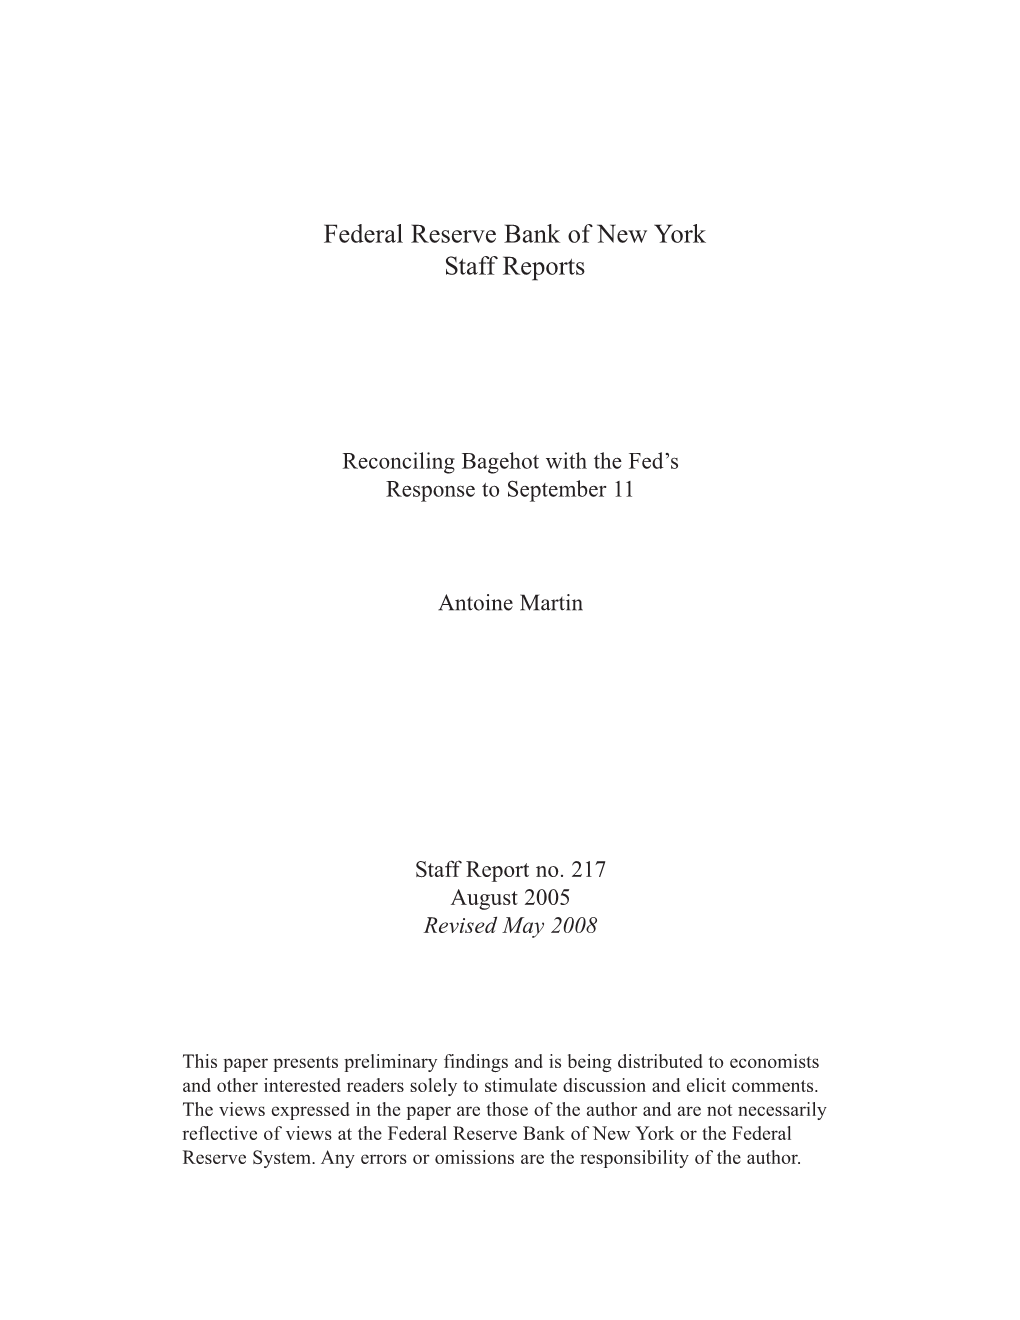 Reconciling Bagehot with the Fed's Response to September 11